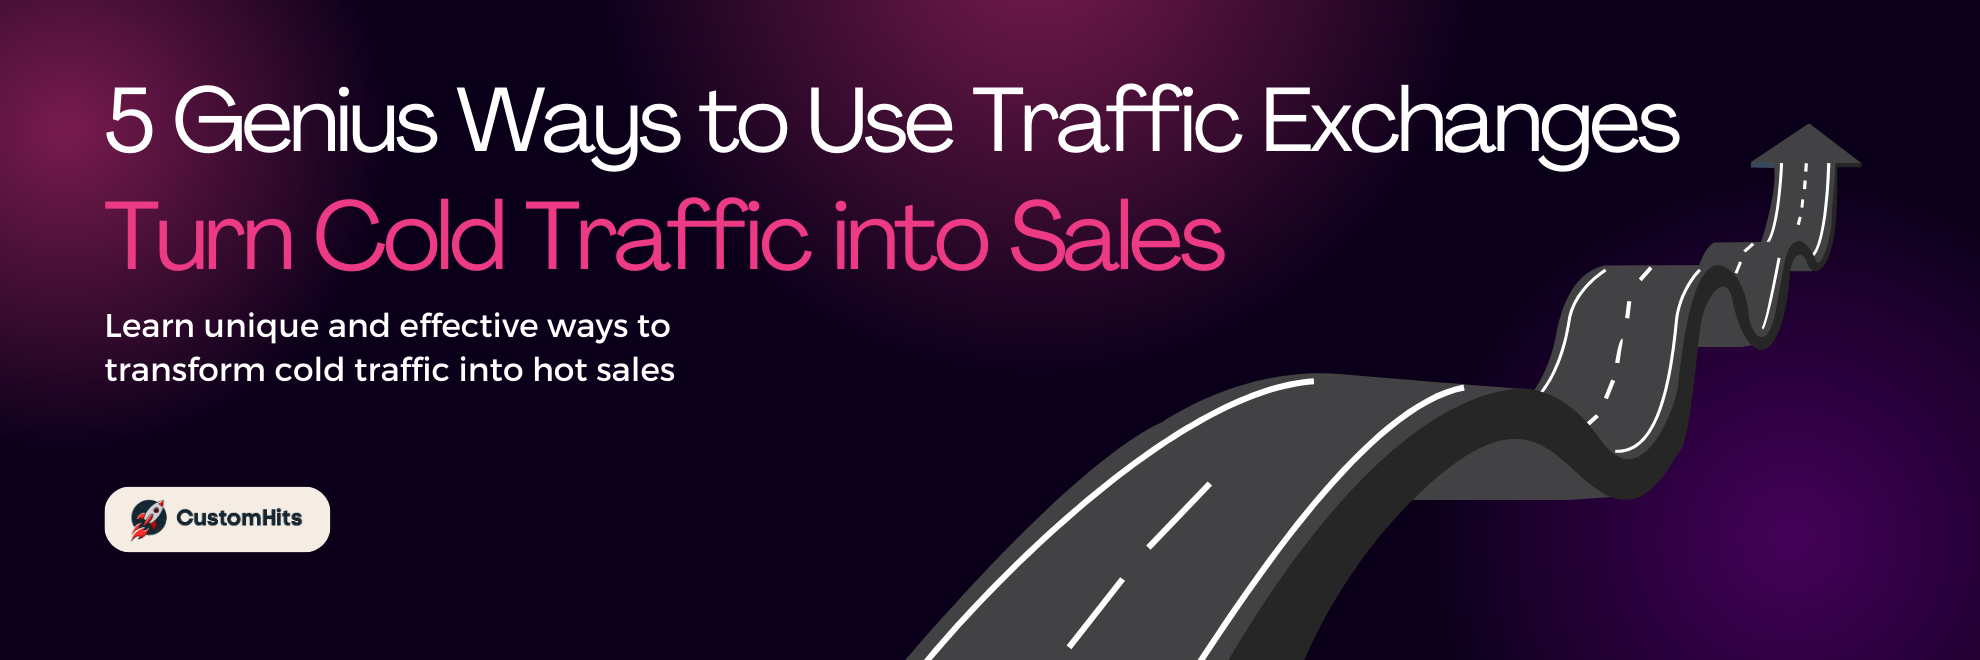 5 Genius Ways to Use Traffic Exchanges for Turning Cold Traffic into Sales